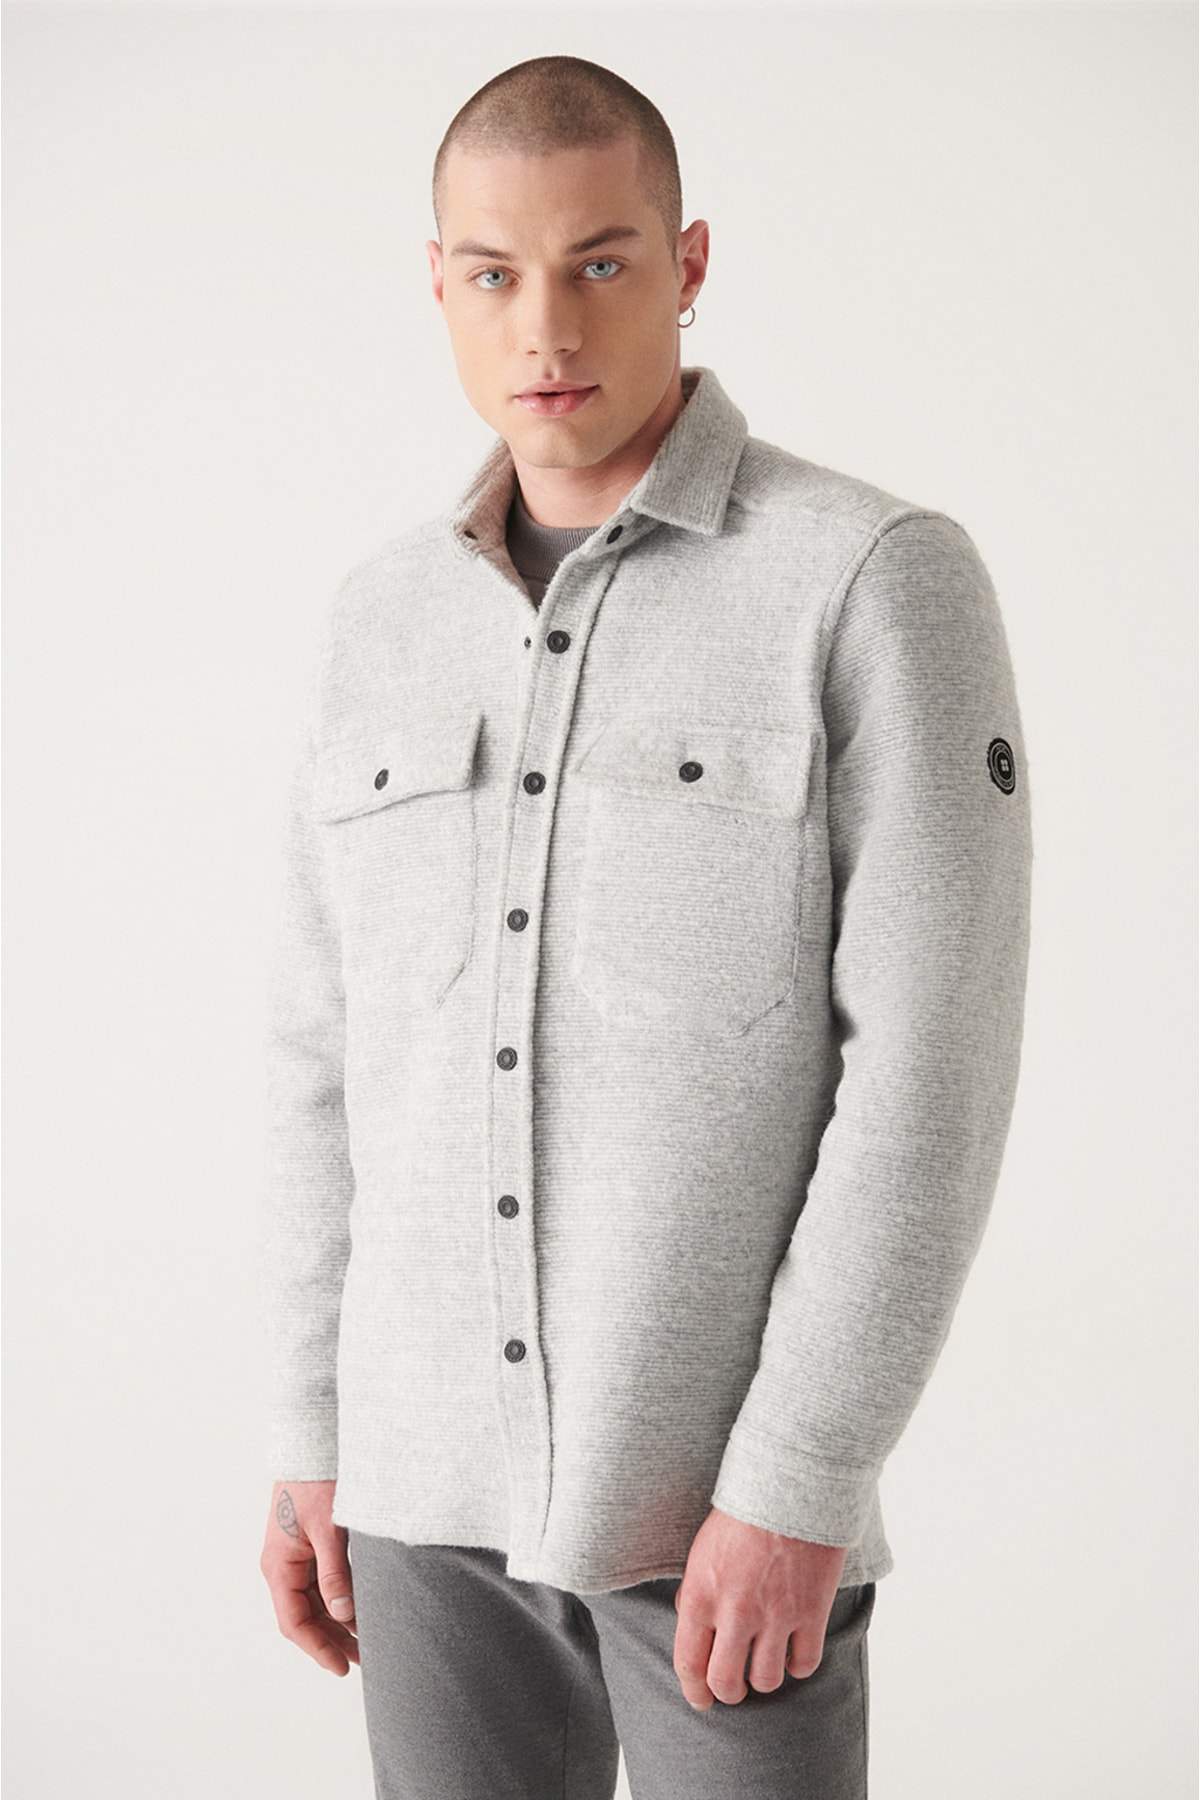 mens-light-gray-classic-collar-textured-oversized-coat-a22y6200